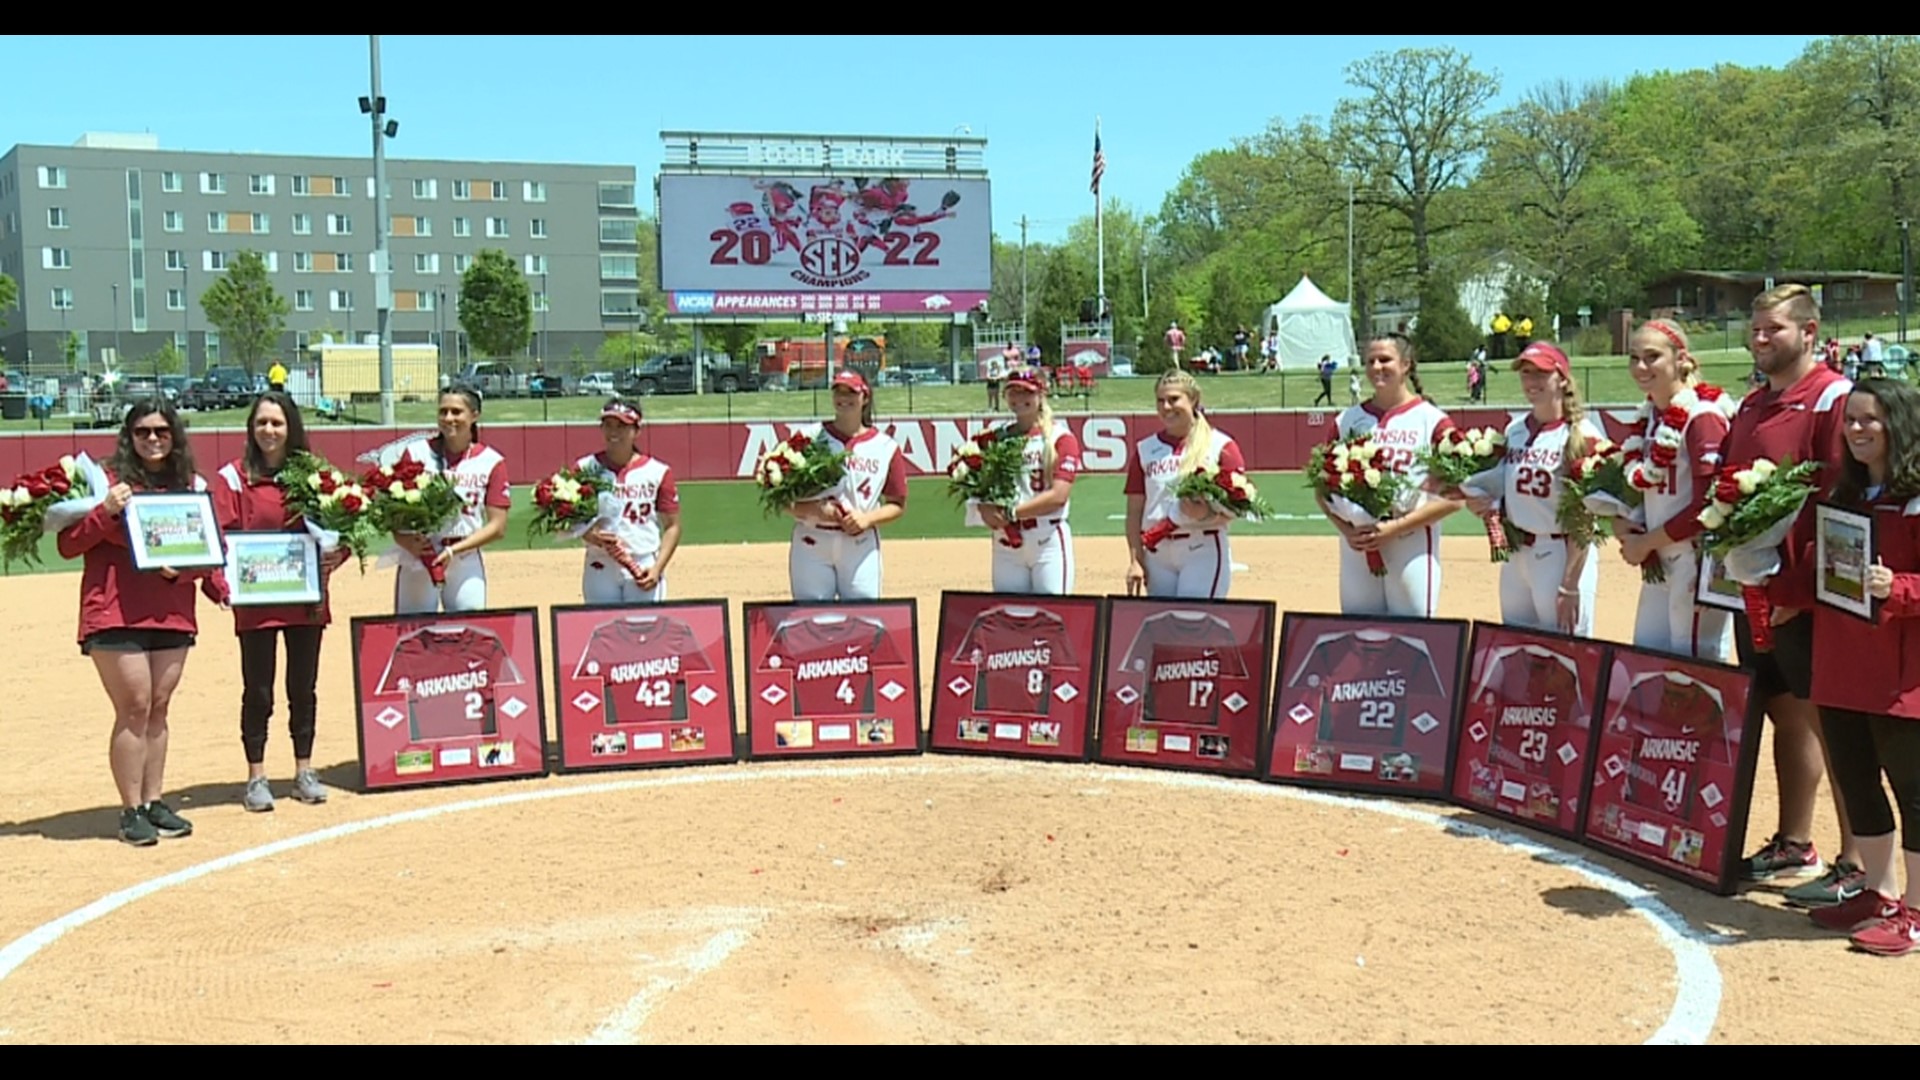 No. 5 Arkansas defeated South Carolina 8-0 on Senior Day to clinch at least a share of the SEC regular season title for the second consecutive year.